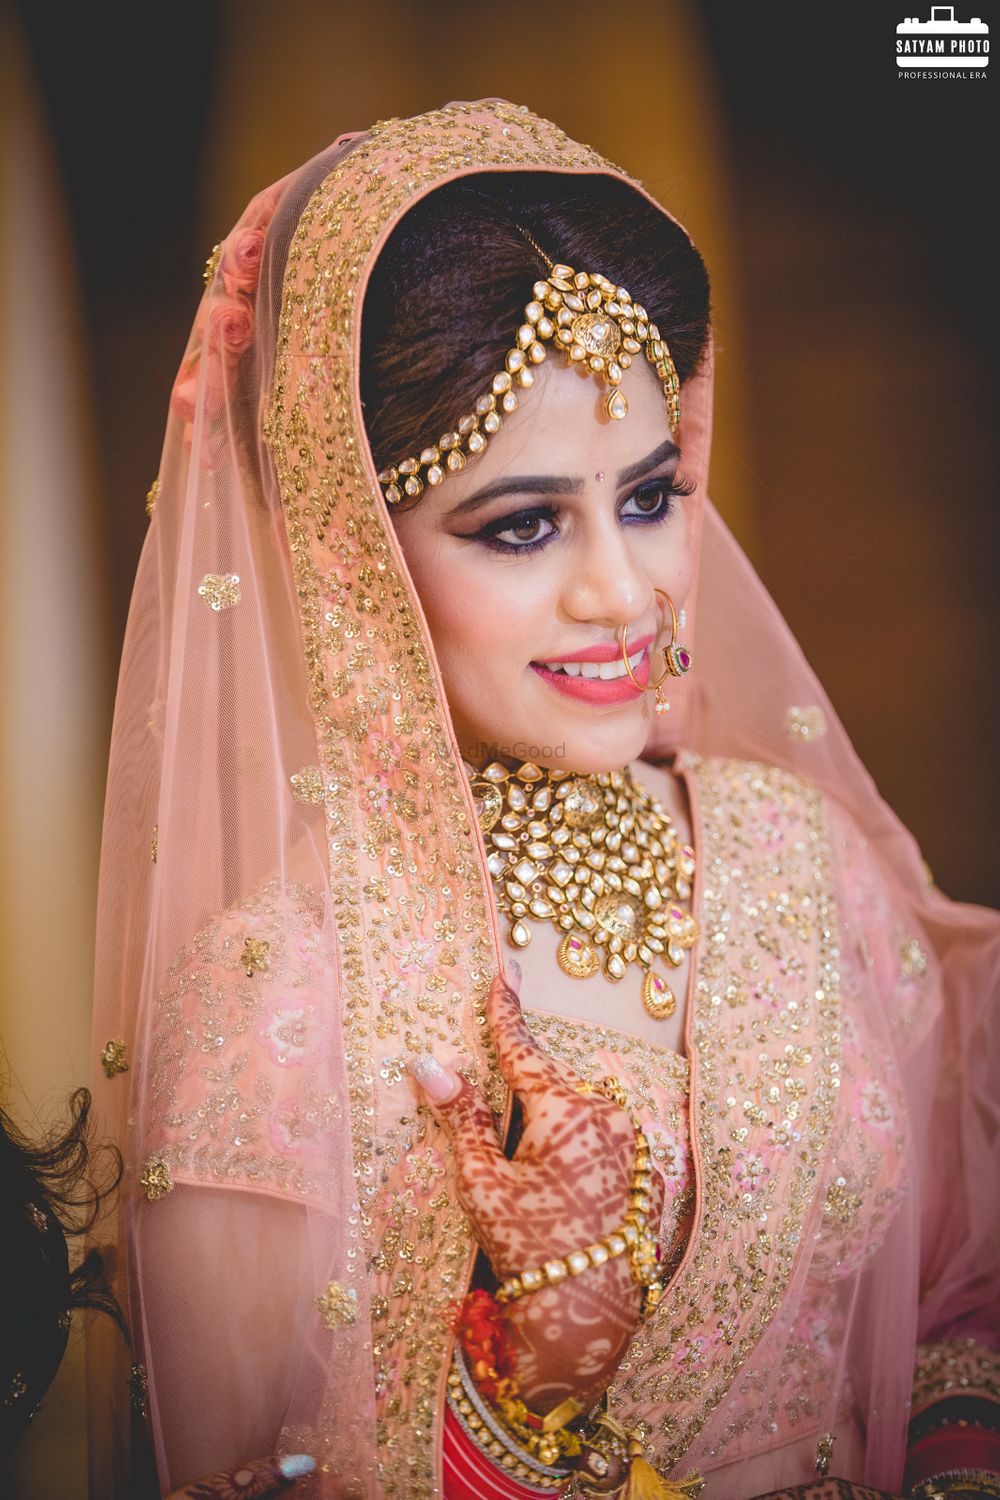 Photo From Wedding Photography - By Satyam Photo